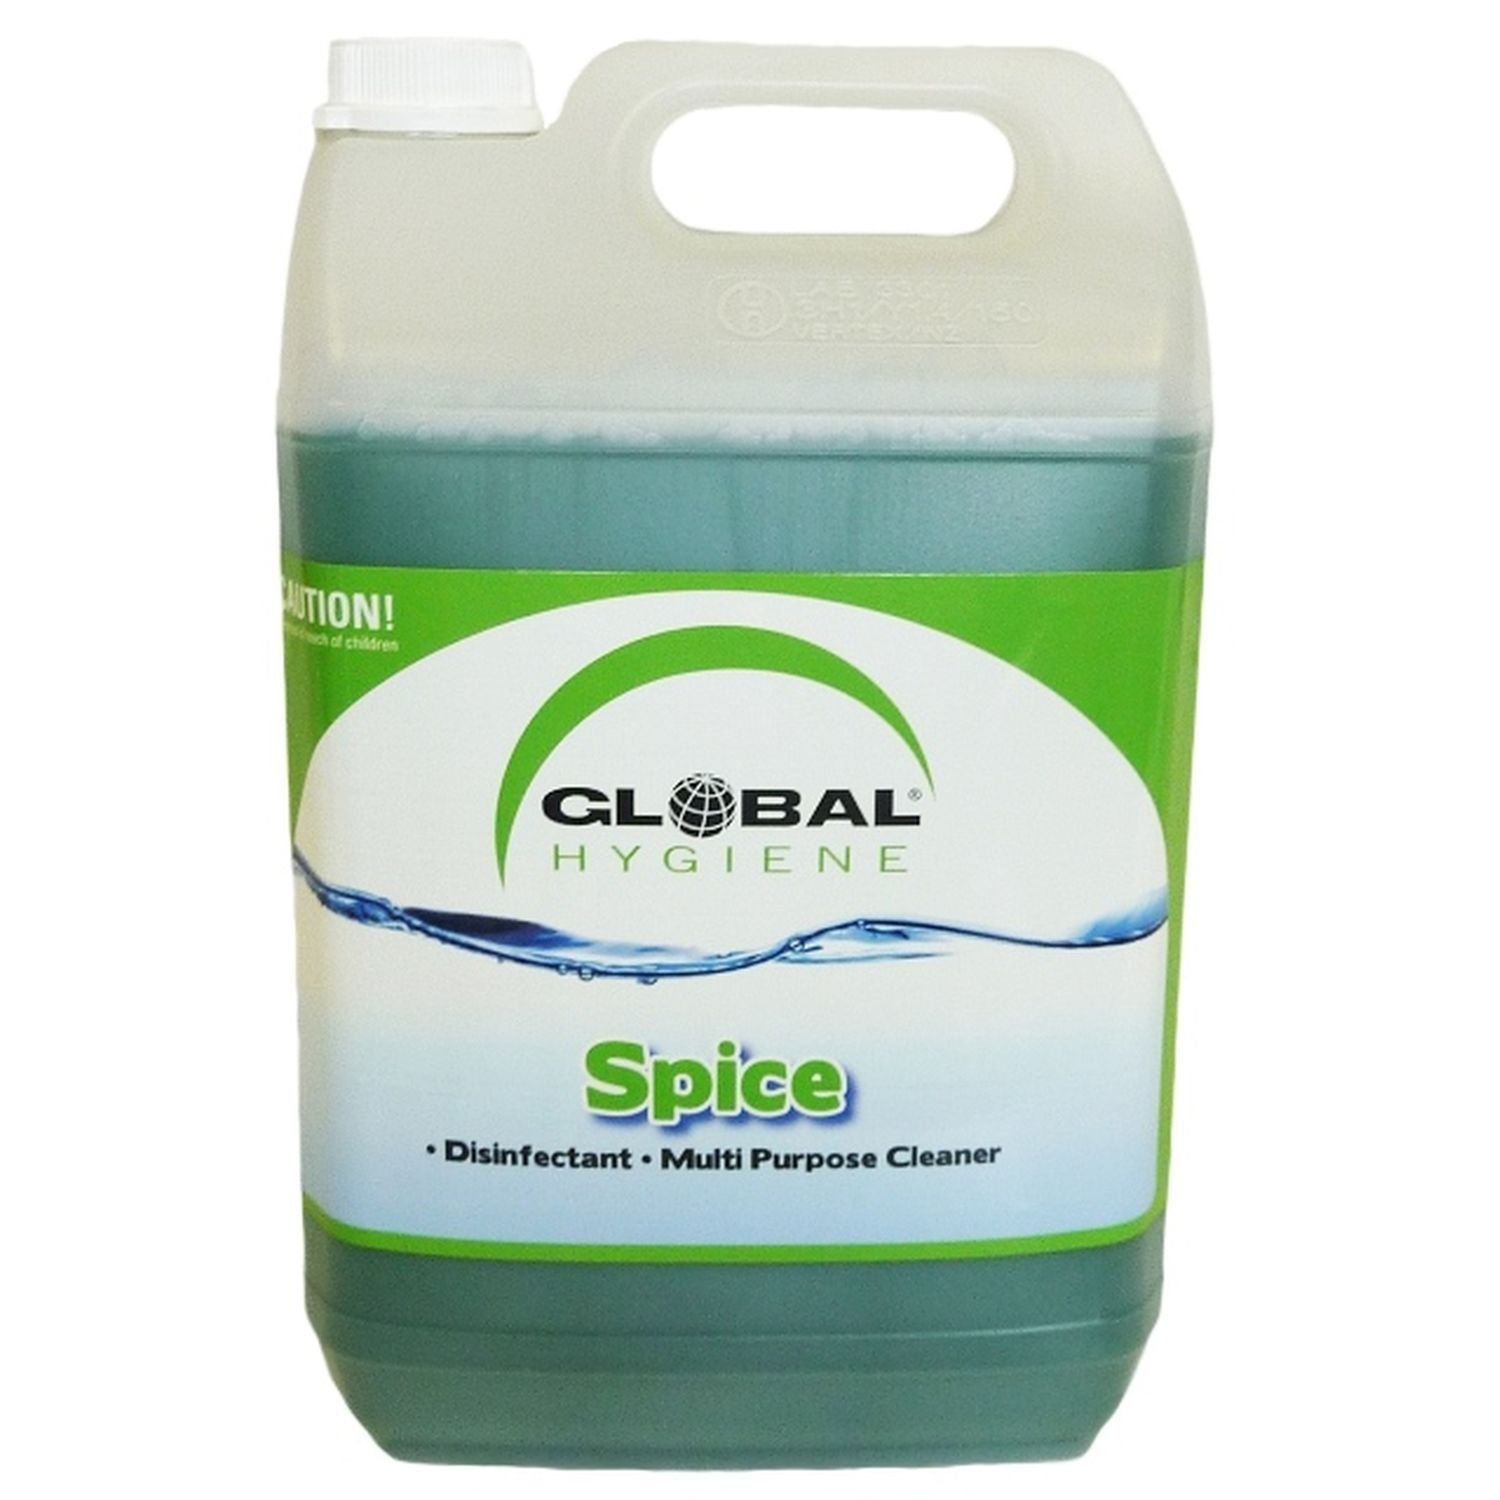 Global Spice Disinfectant Cleaner 5L